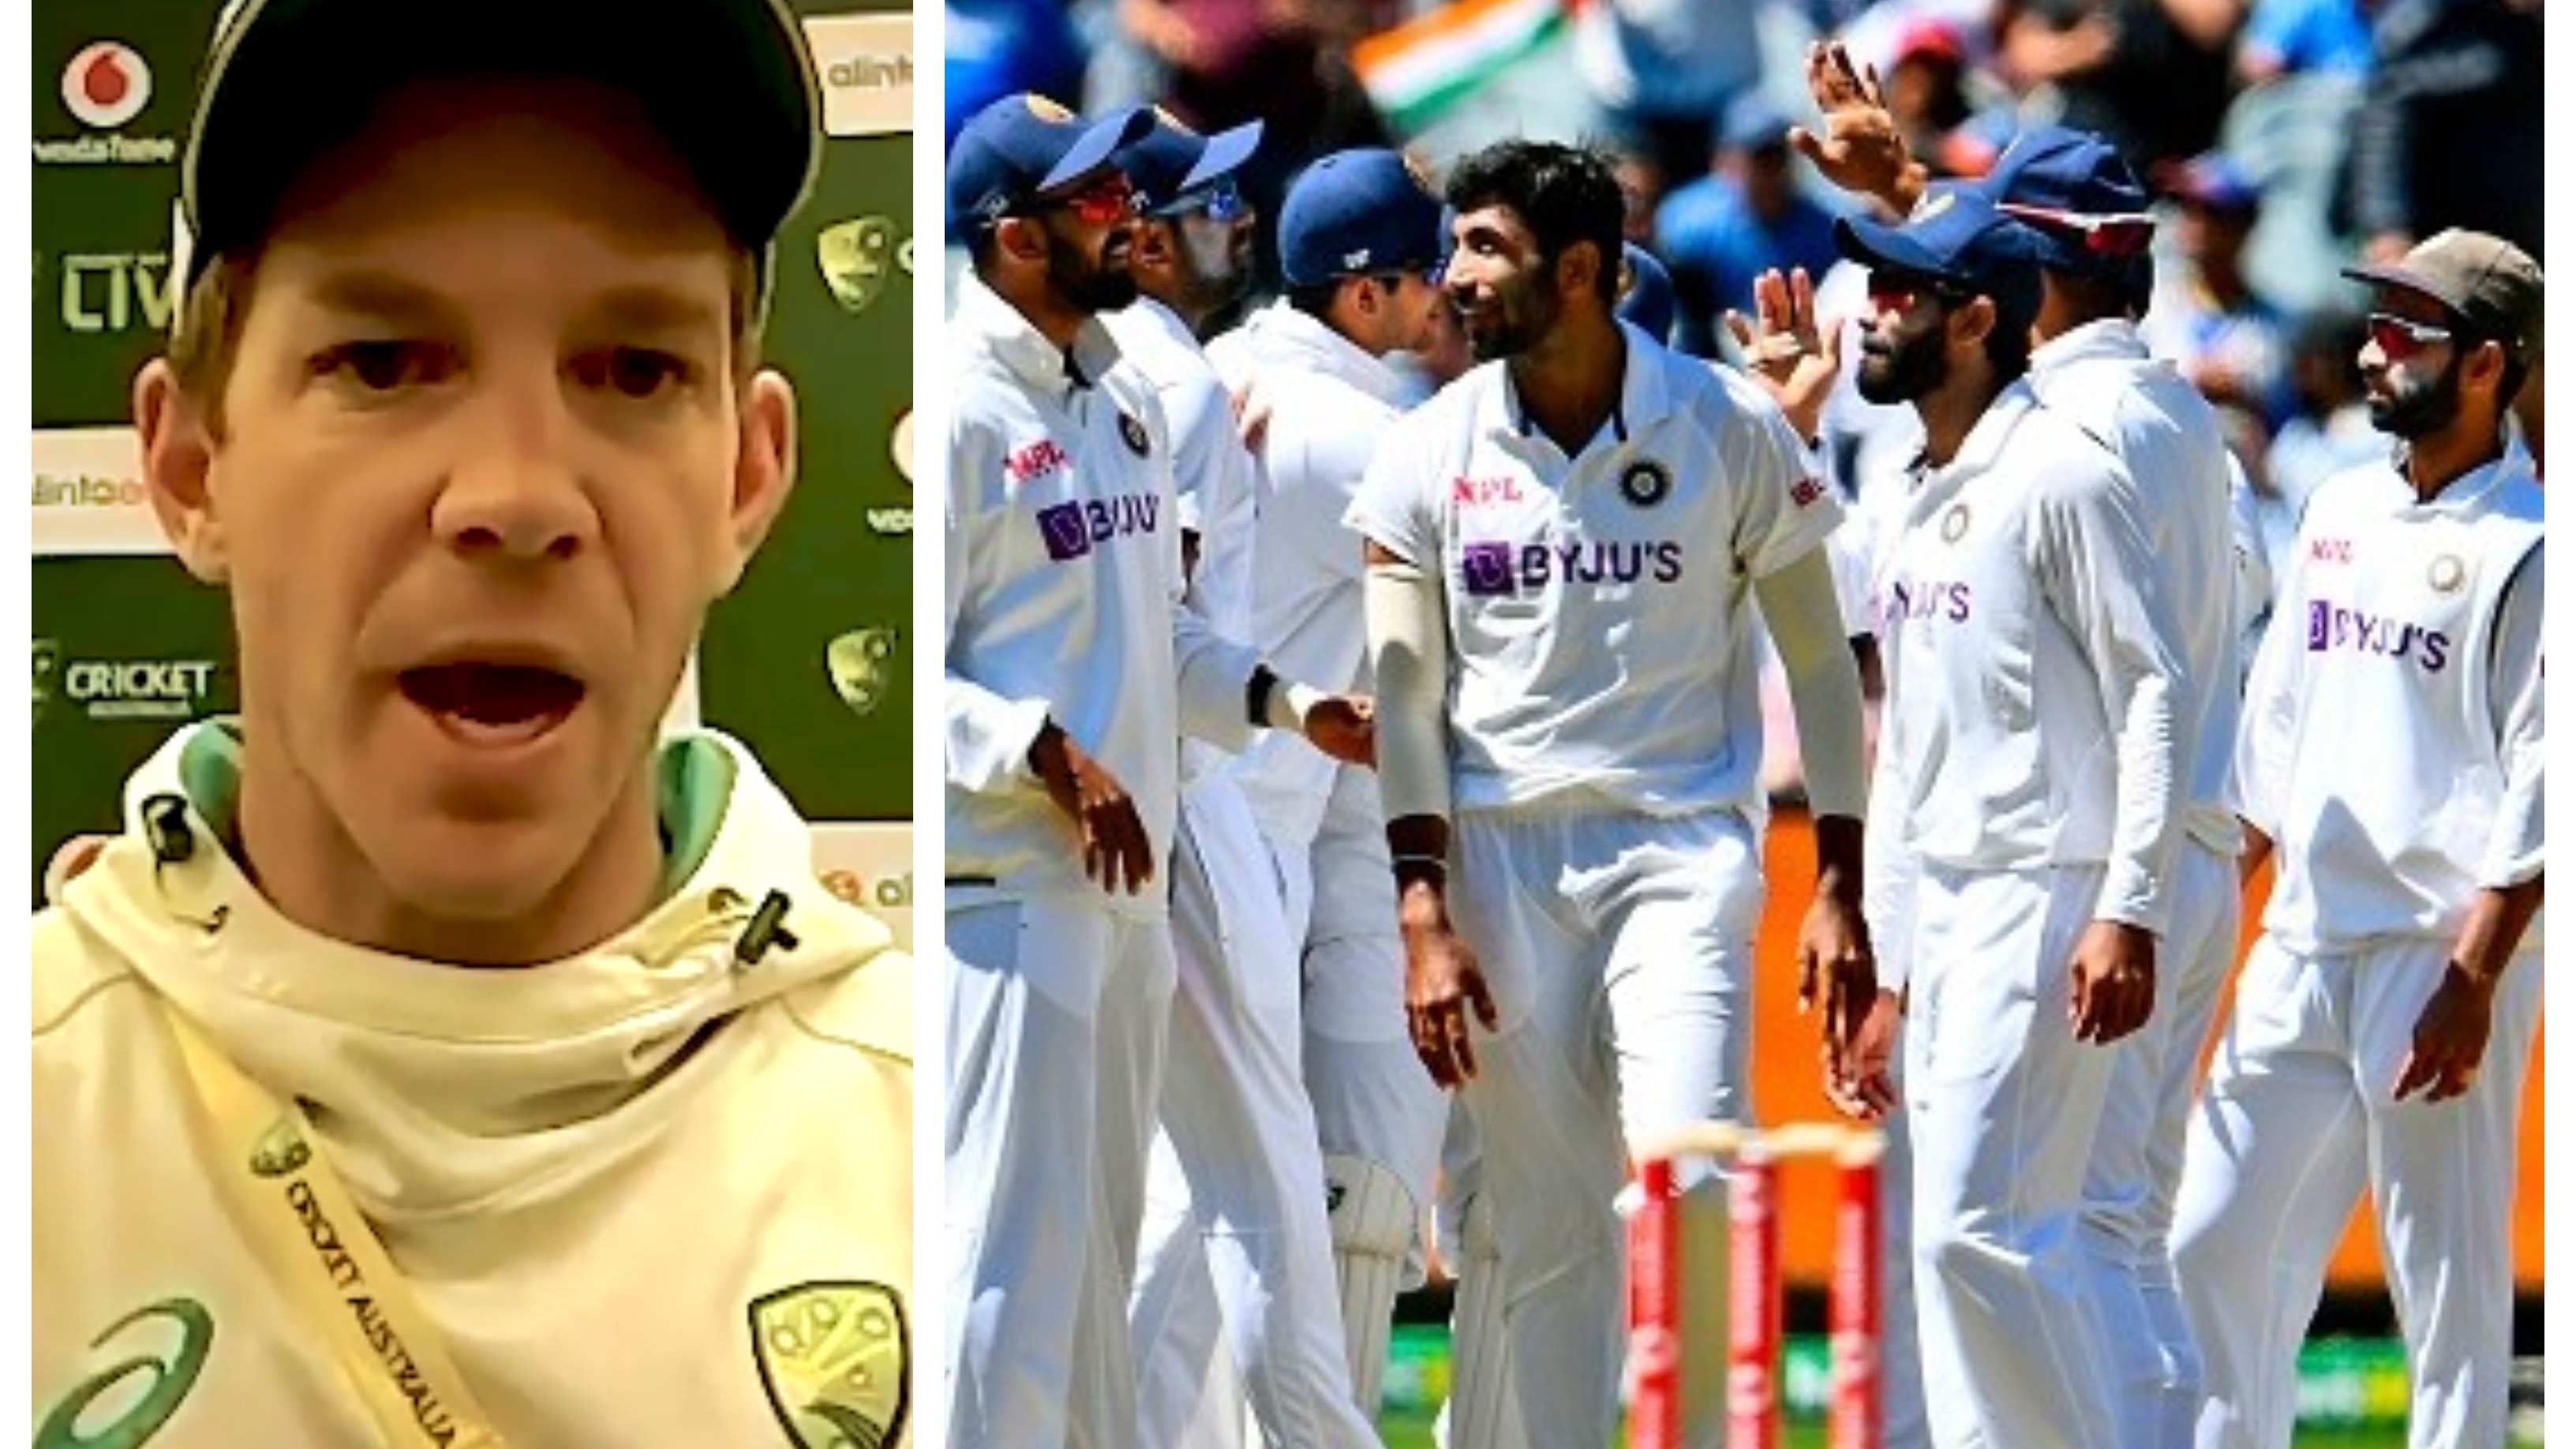 AUS v IND 2020-21: ‘Tension boiling’, says Tim Paine after India’s reported reluctance to travel to Brisbane